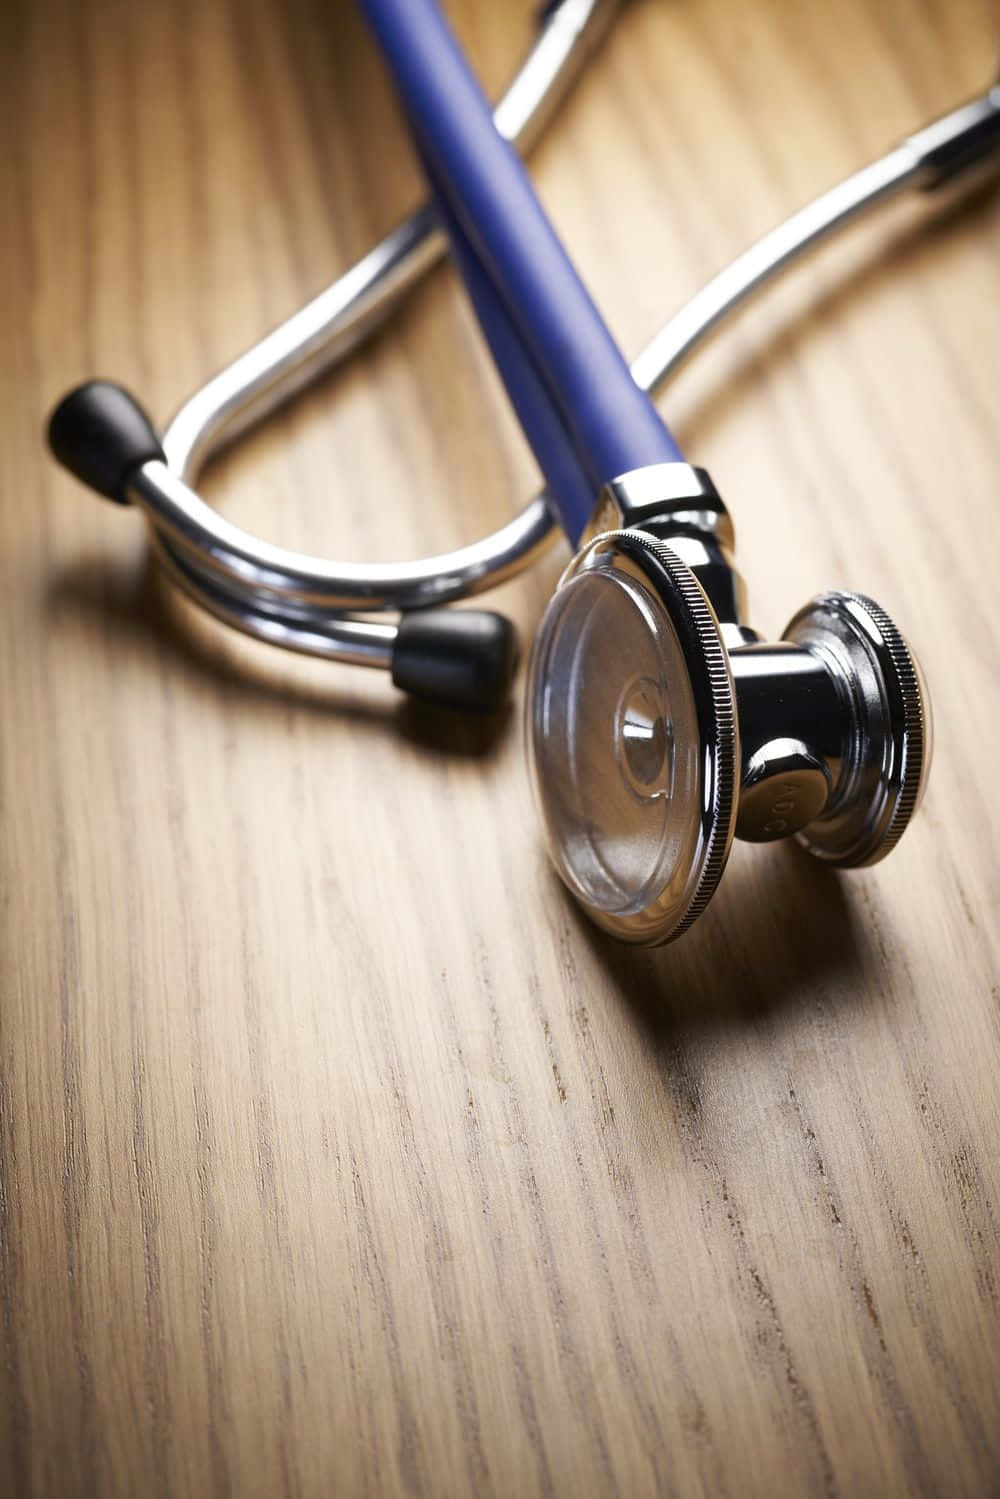 High Definition Image Of A Stethoscope On A Medical Table Wallpaper